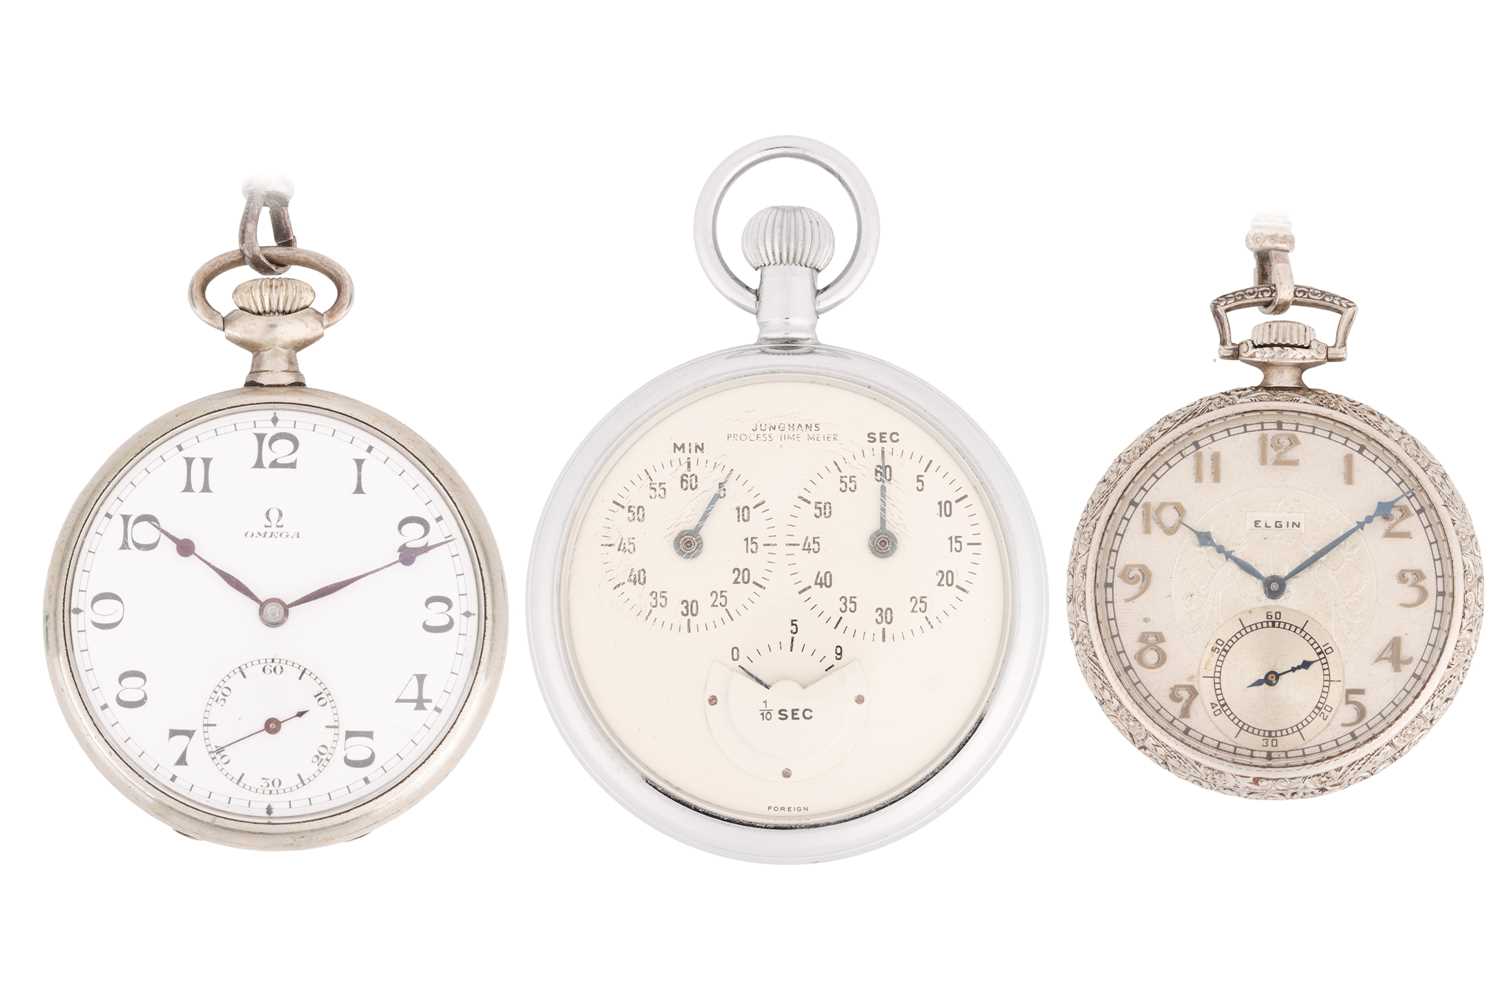 A collection includes an Omega pocket watch, Junghans stopwatch and an Elgin pocket watch. The open-